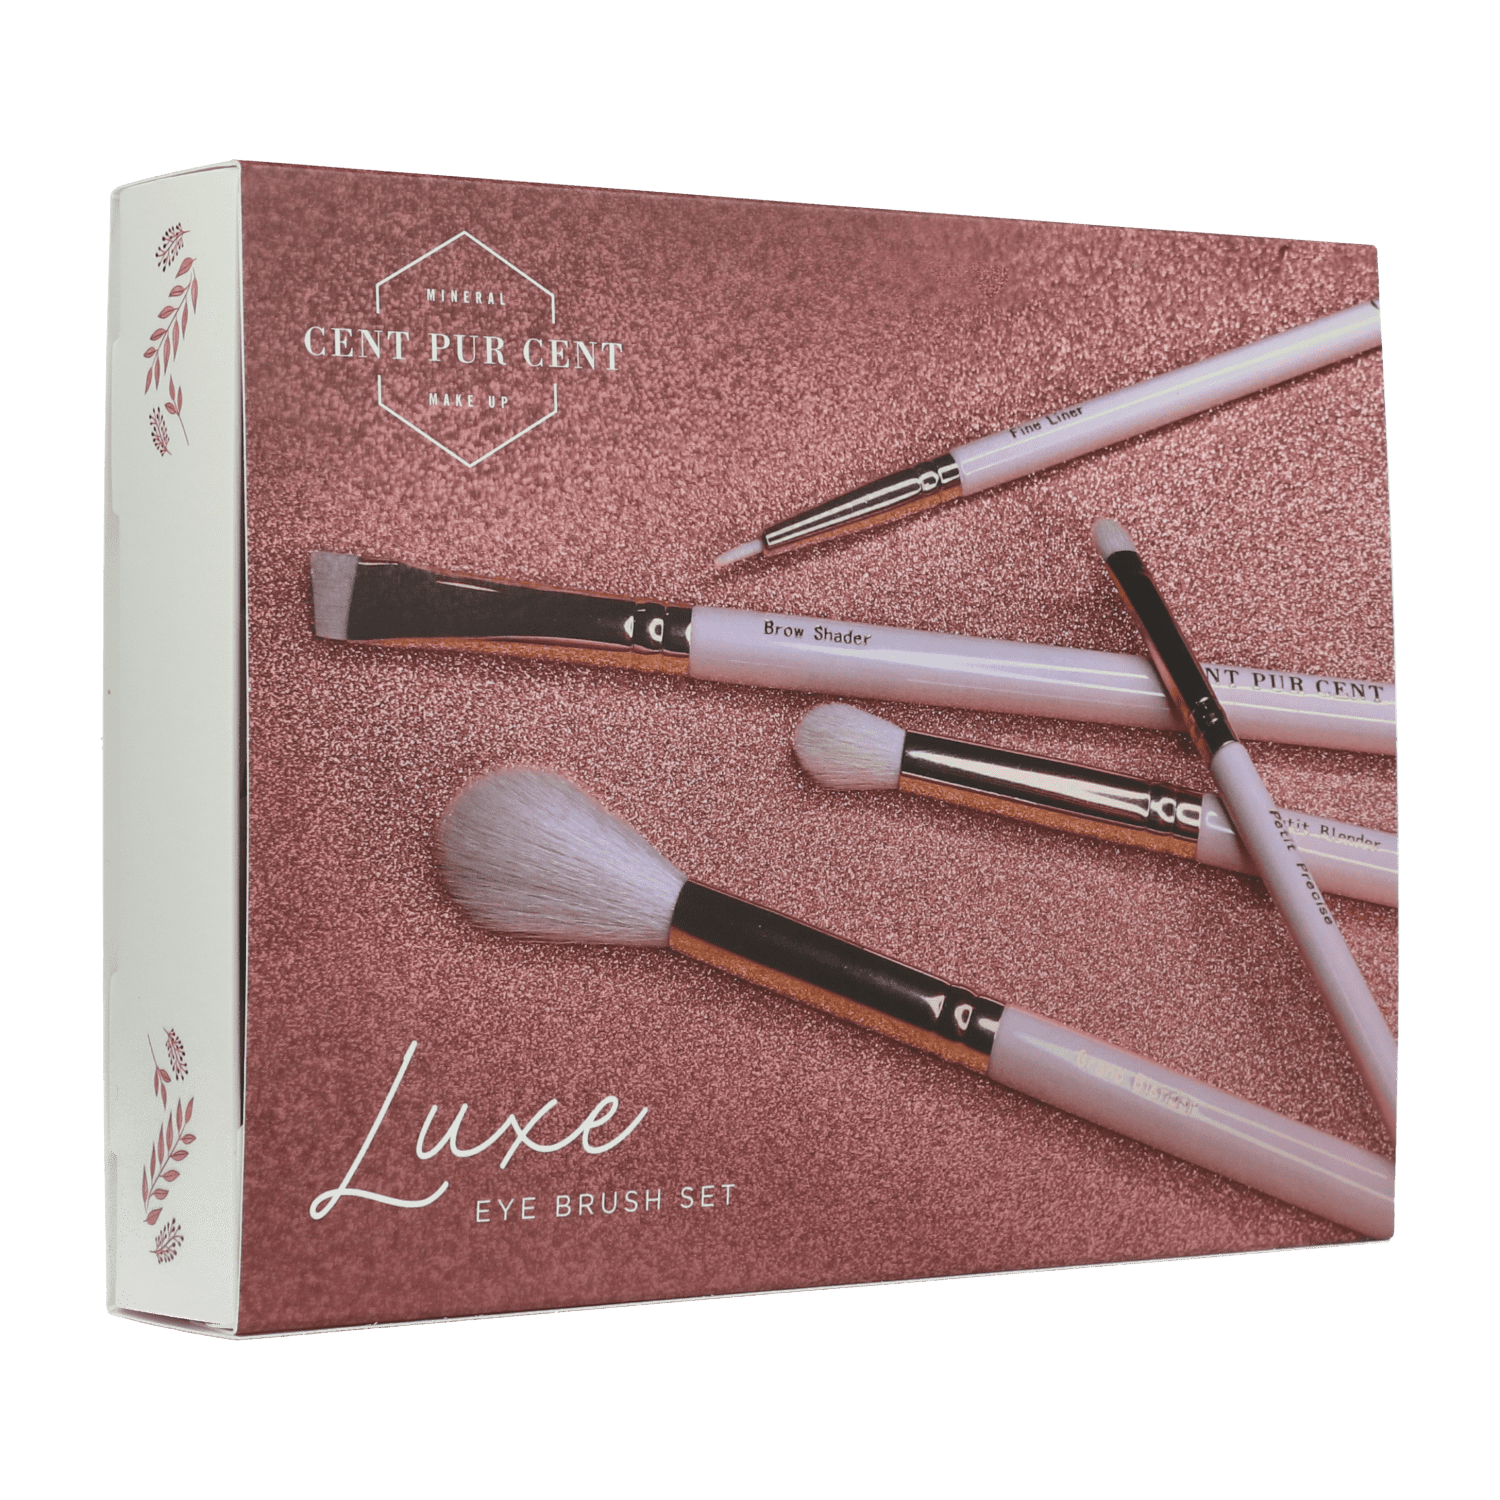 Cent Pur Cent Luxe Eye Brush Set